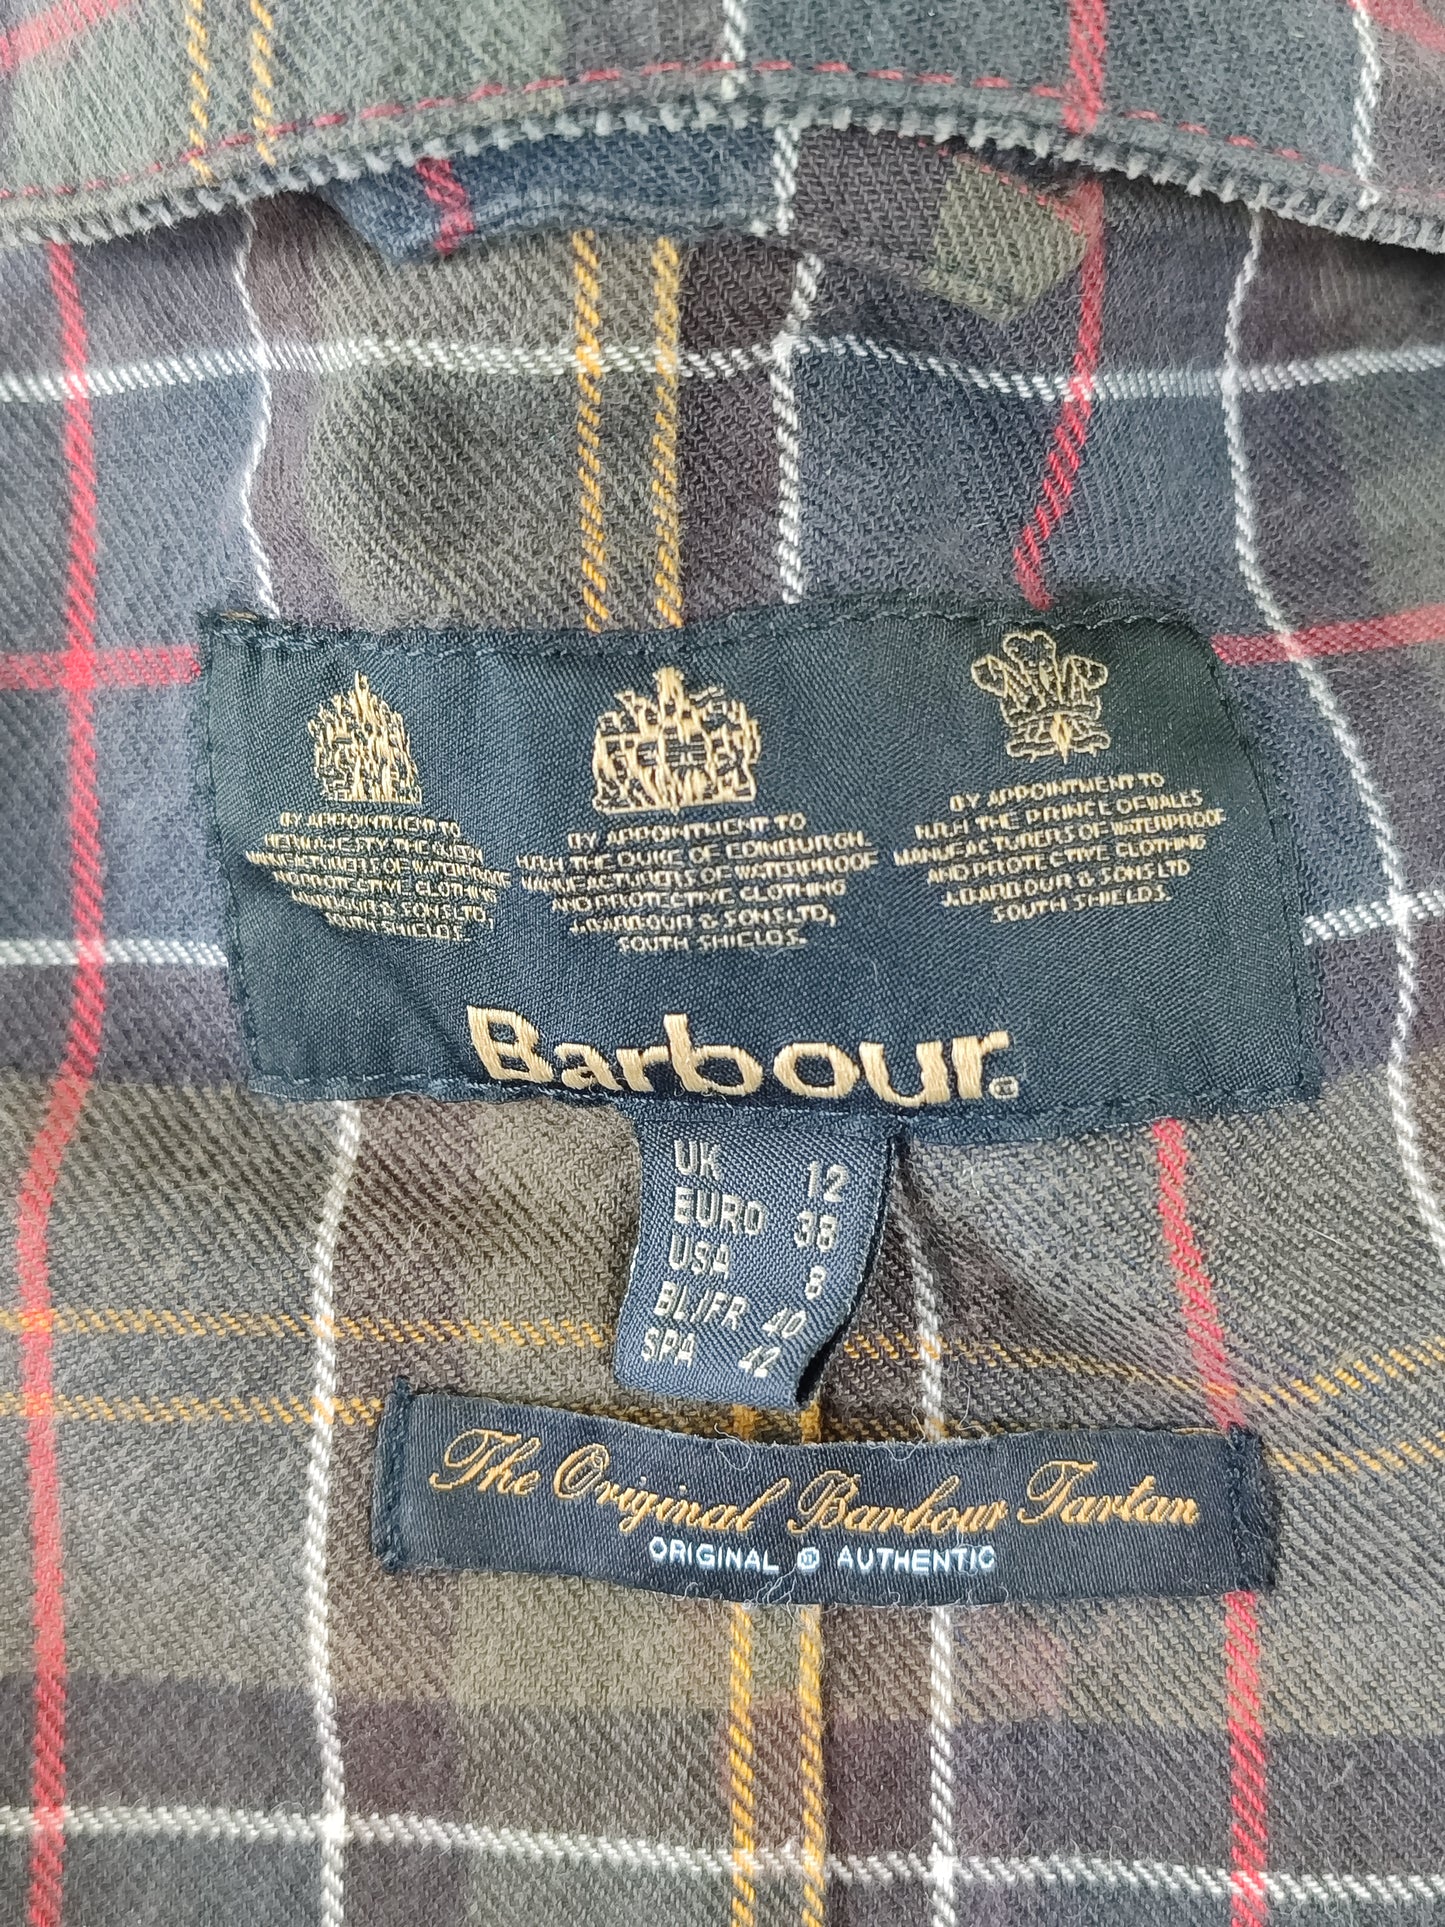 Giacca Barbour donna rosso Vintage Beadnell Uk 12 Medium-Lady Red Vintage Beadnell M